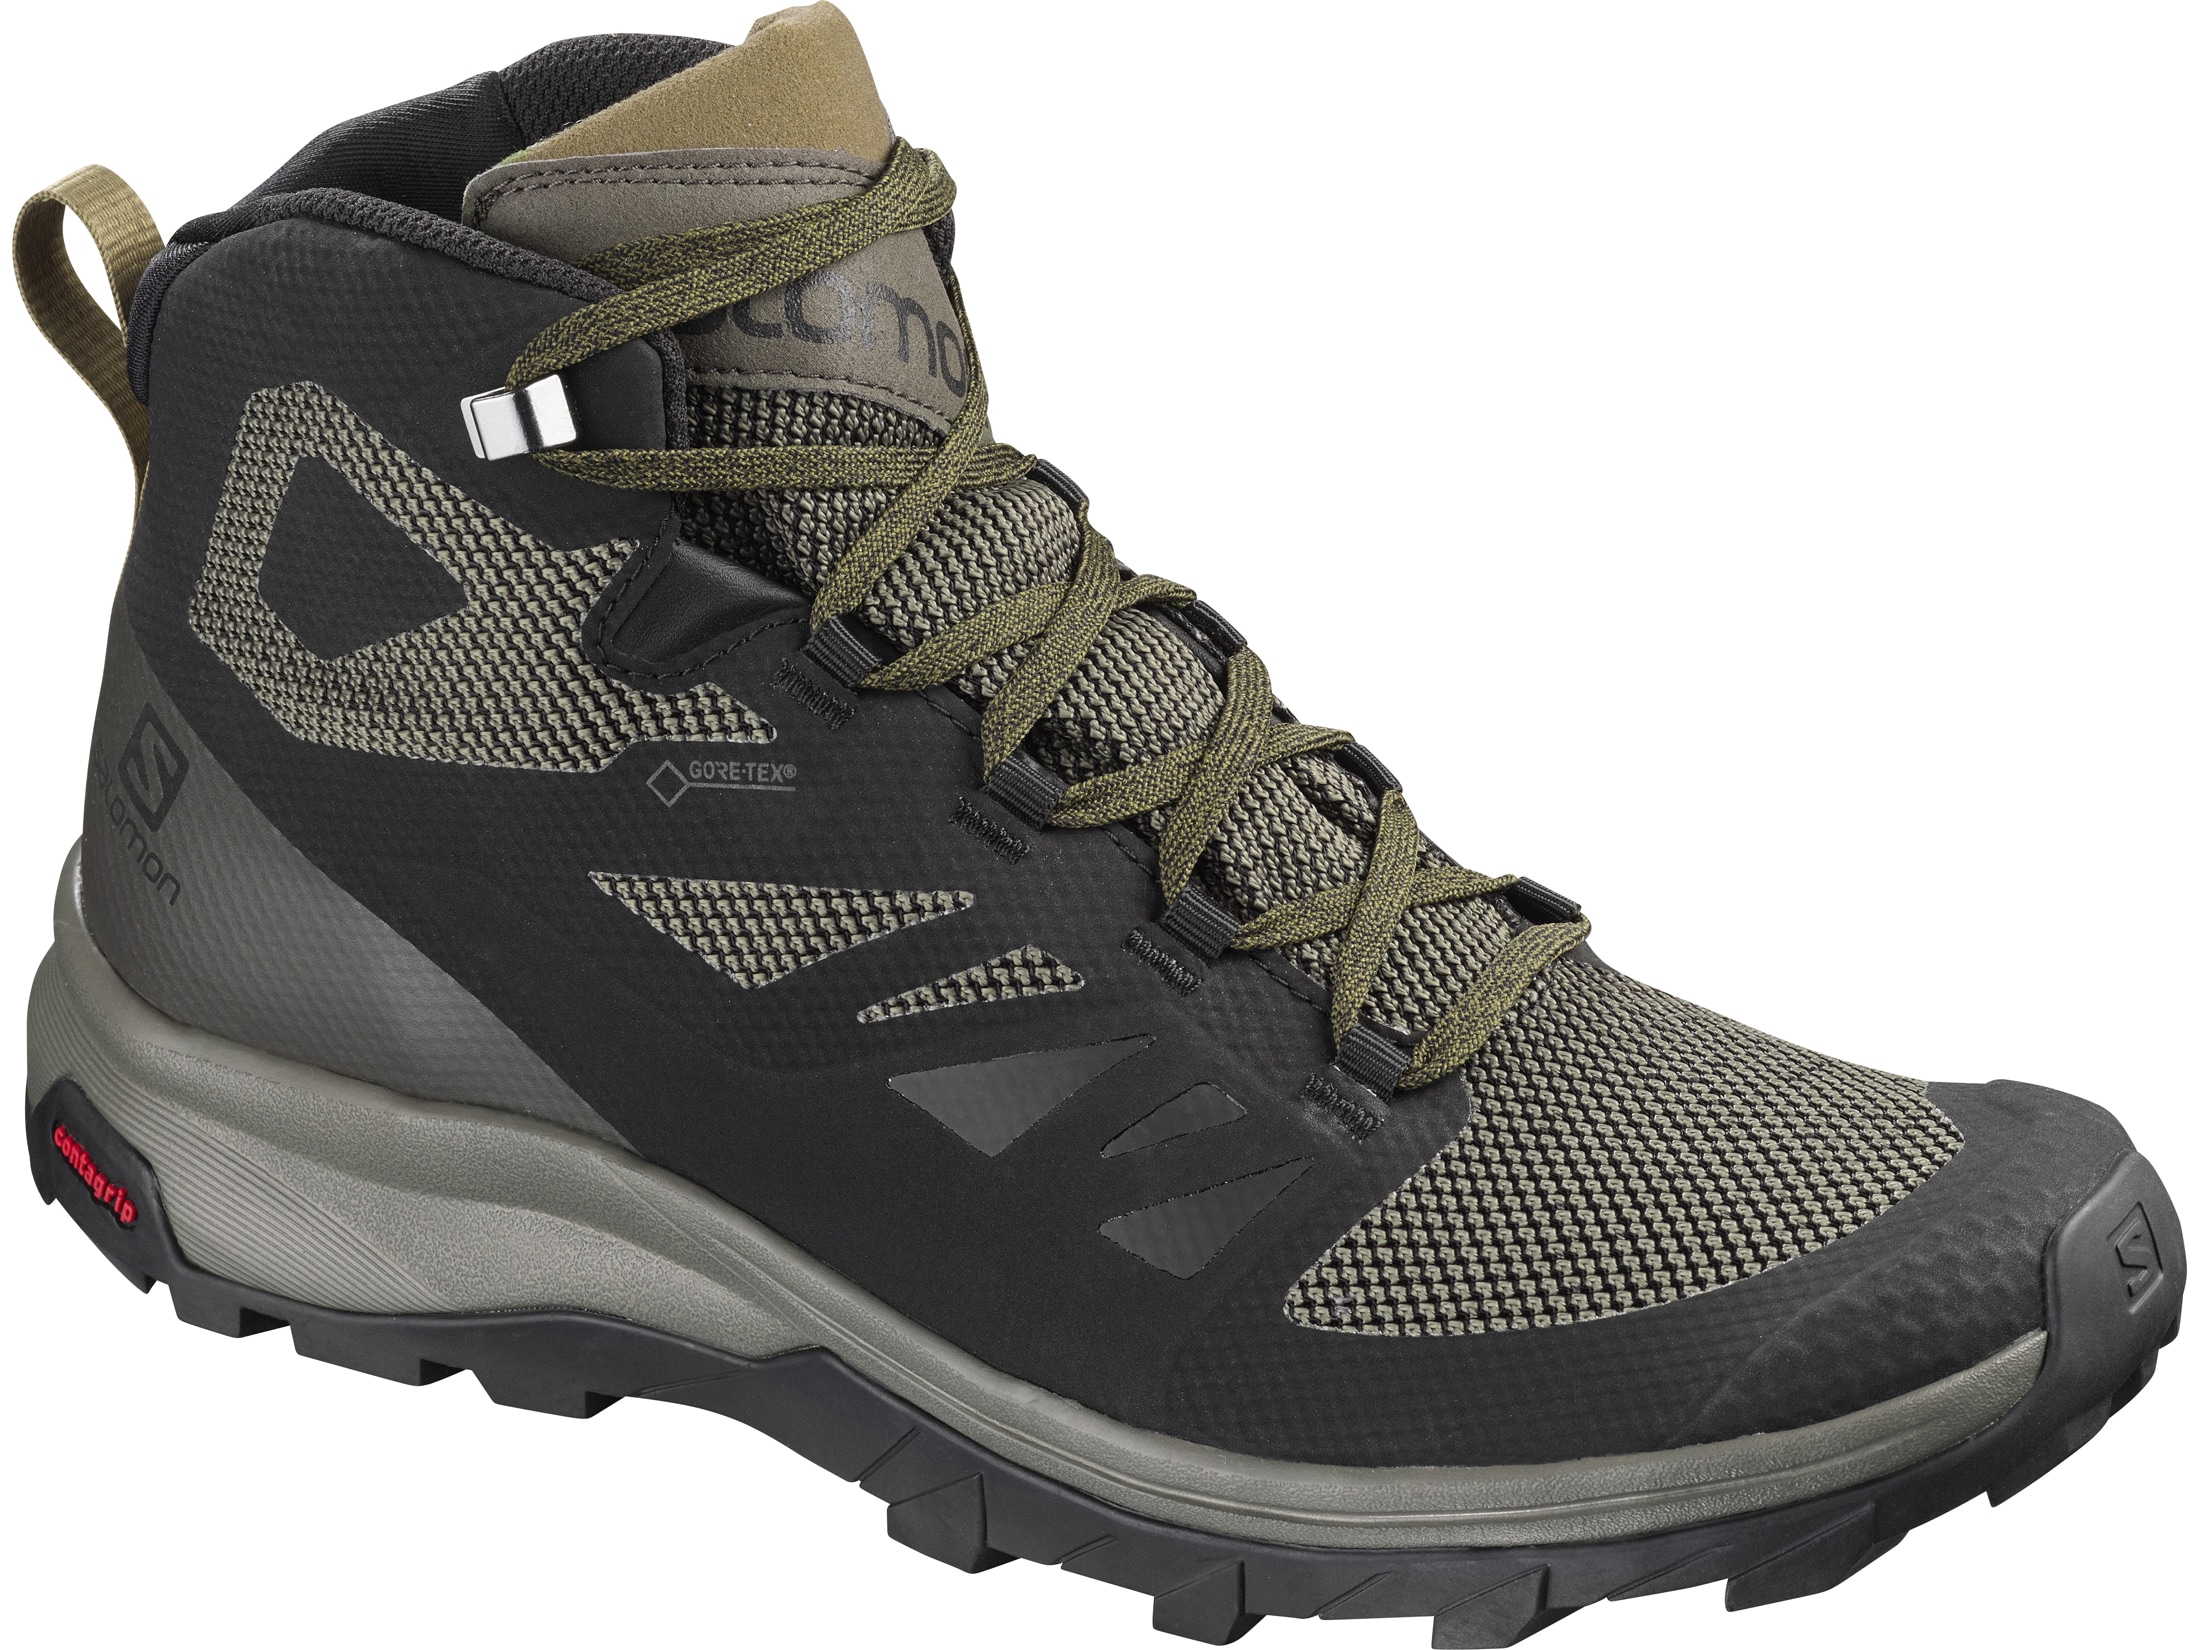 Salomon Outline Mid GTX 5 Hiking Boots Synthetic Black/Beluga/Capers